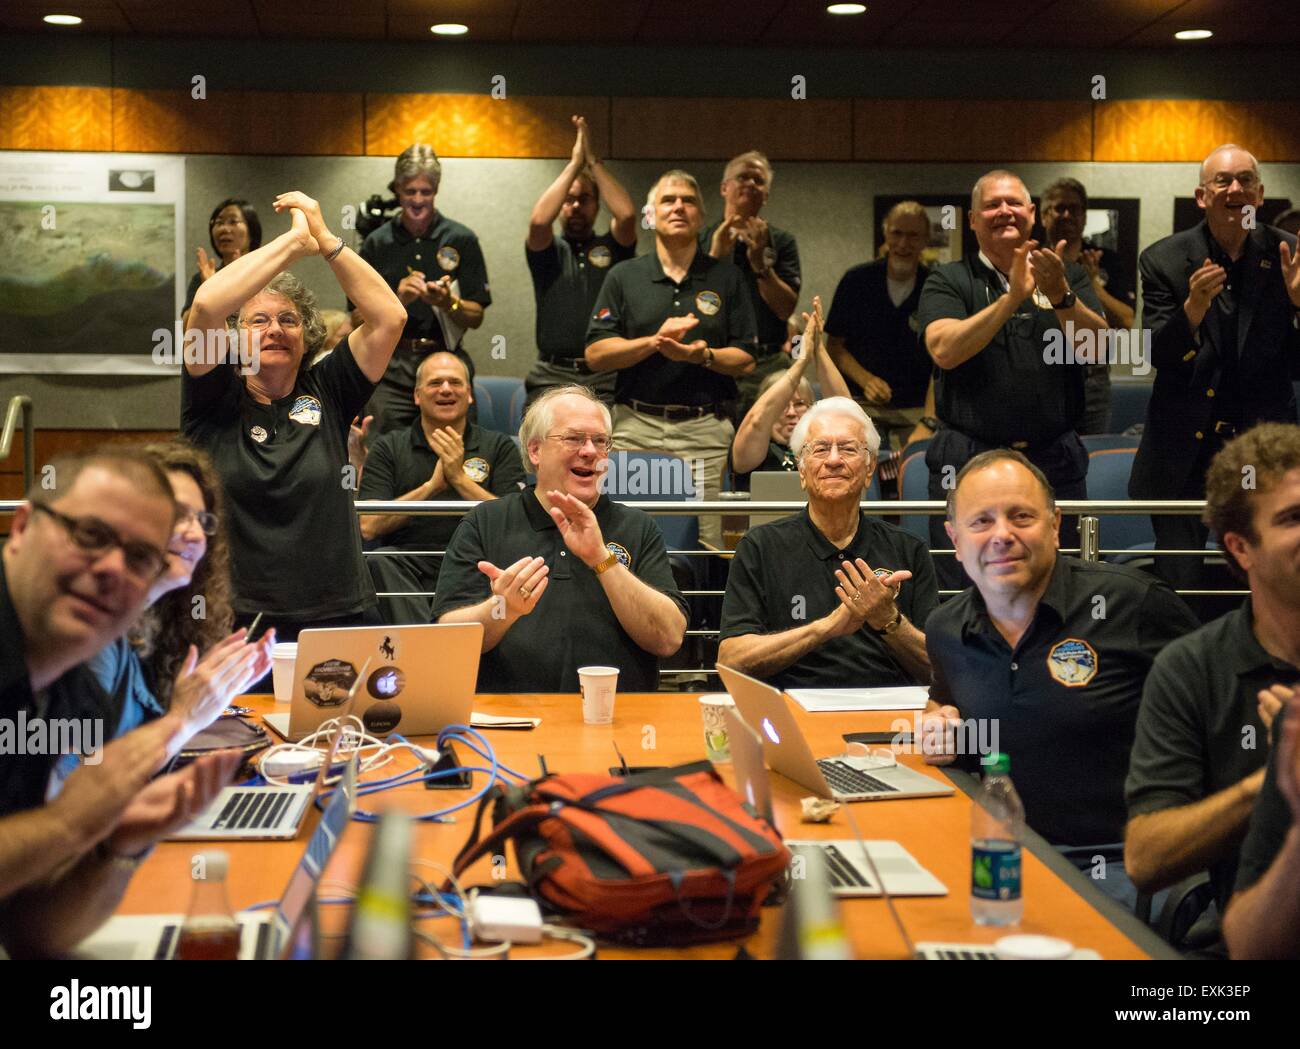 Laurel, Maryland, USA. 14th July, 2015. Members of the New Horizons science team react to seeing the last and sharpest image of Pluto during the flyby of the space probe at the Johns Hopkins University Applied Physics Laboratory July 14, 2015 in Laurel, Maryland. Stock Photo